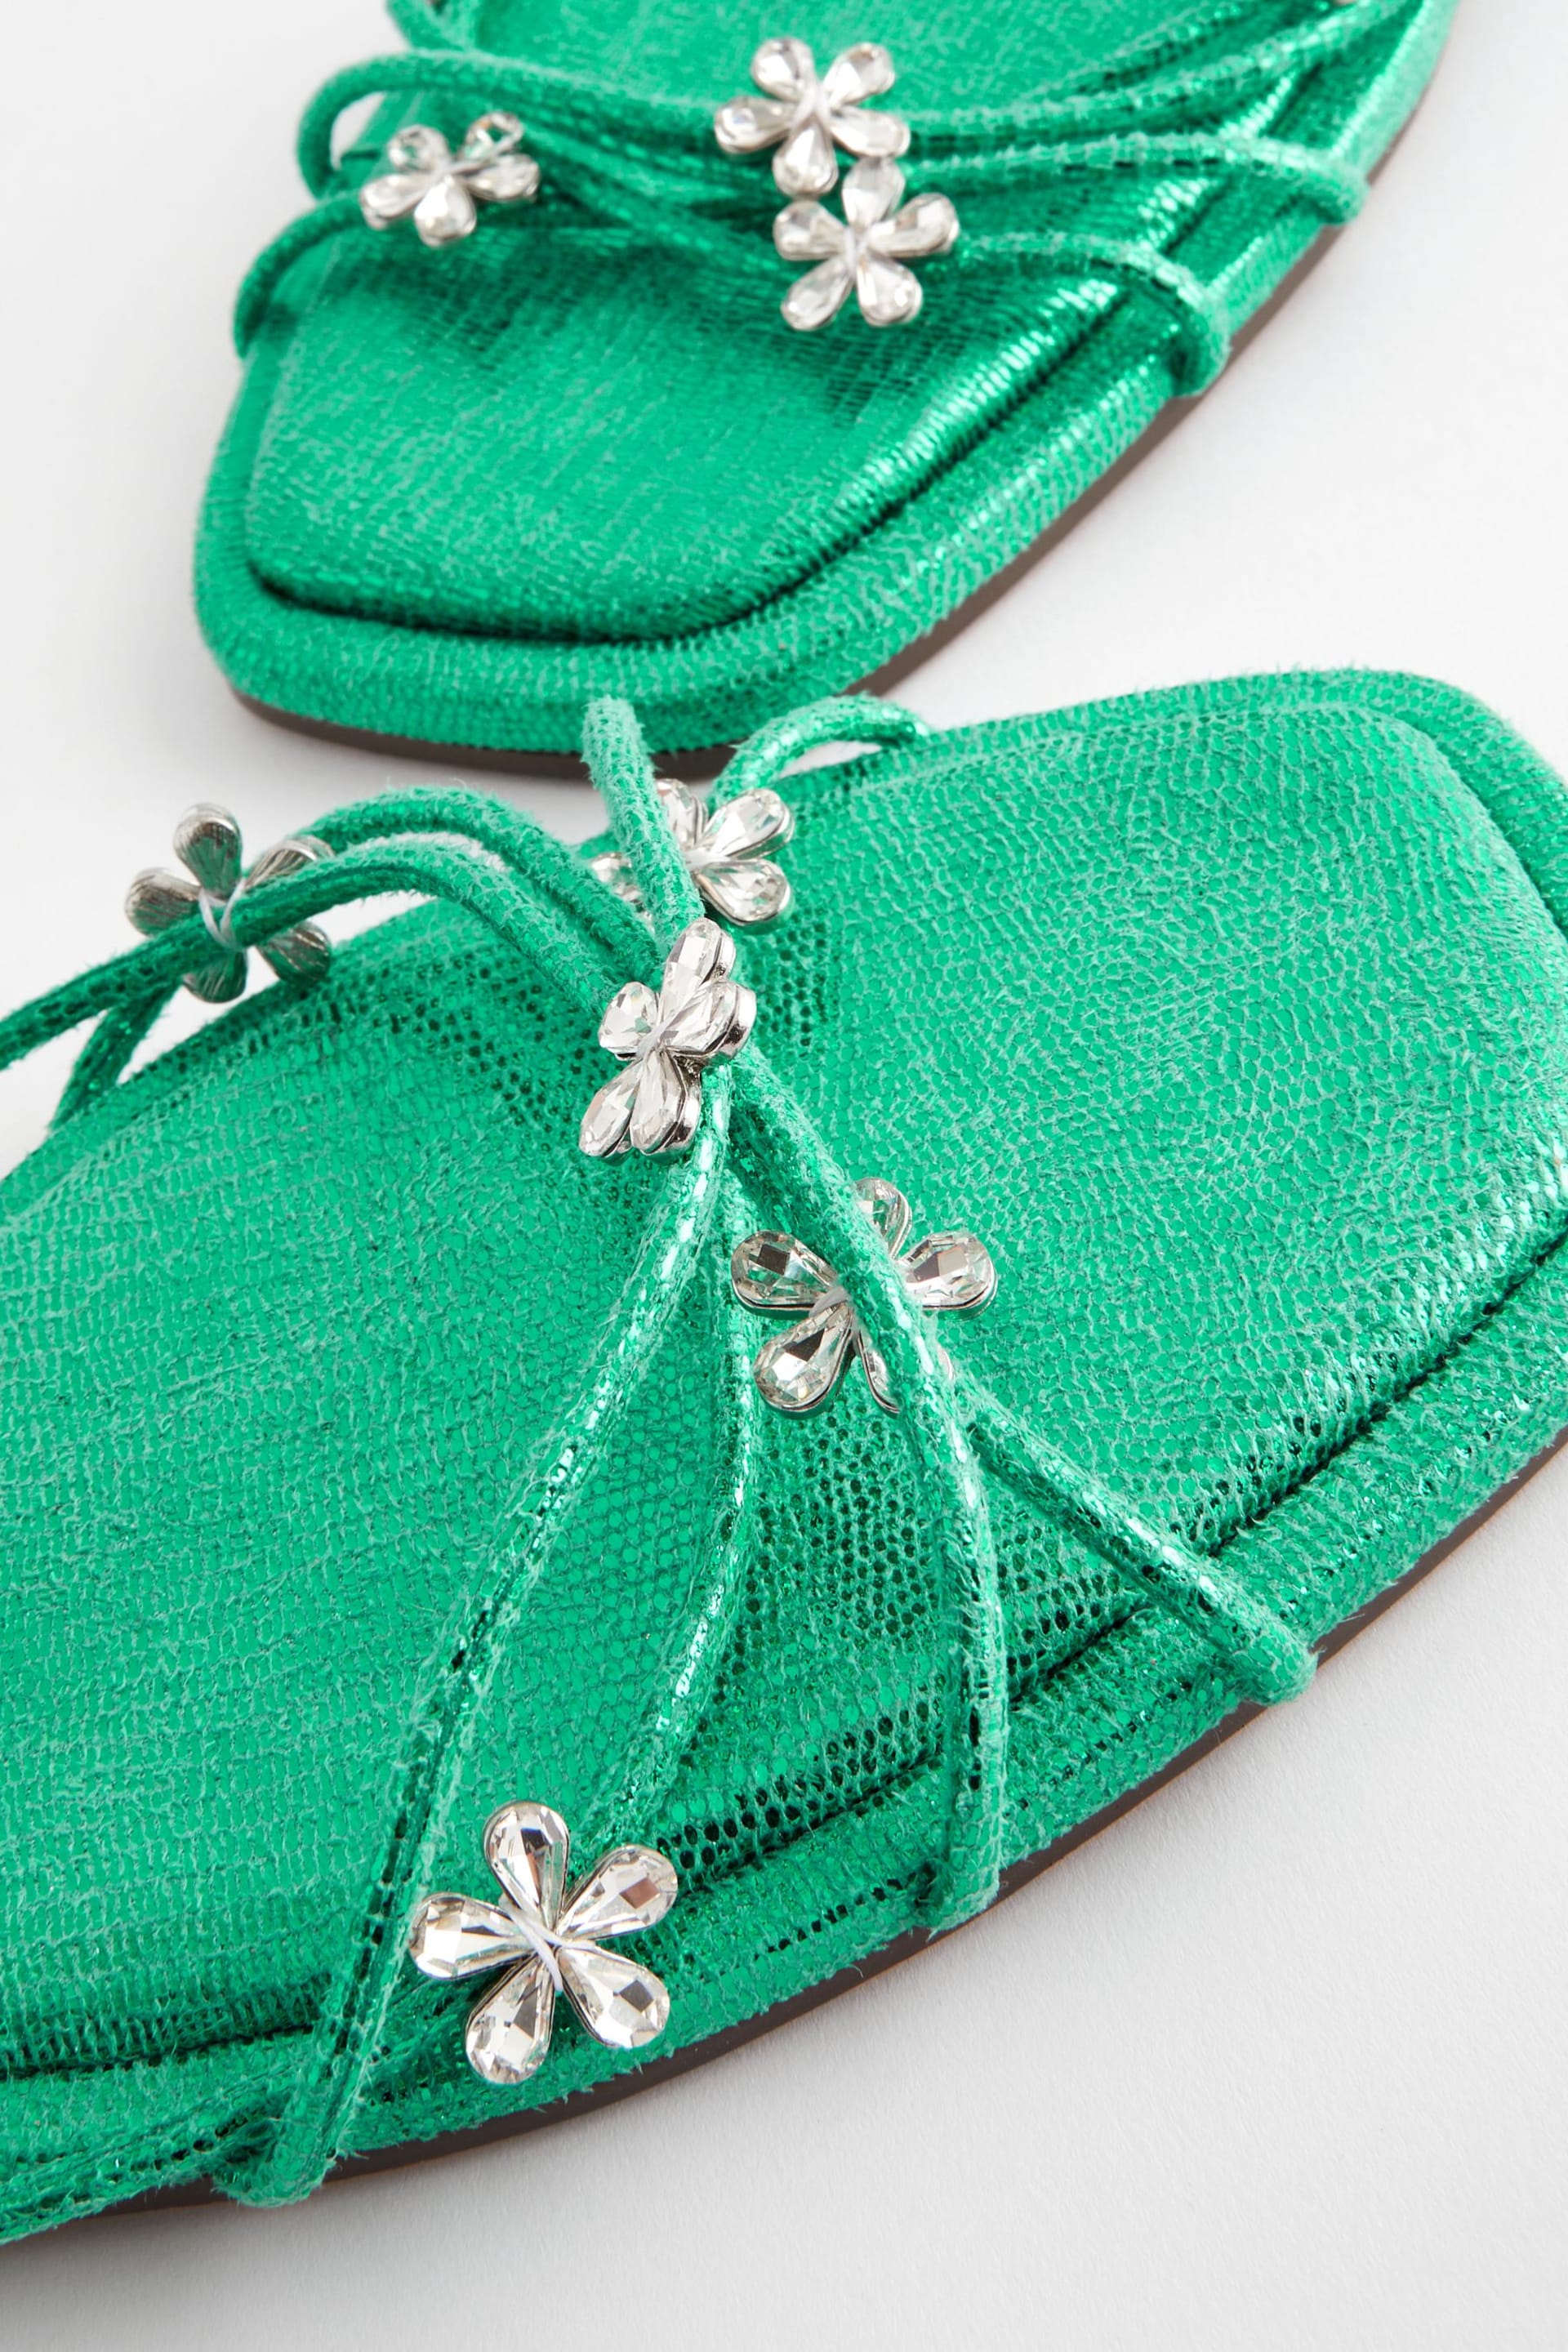 Green Metallic Jewelled Flower Strappy Sandals - Image 10 of 10